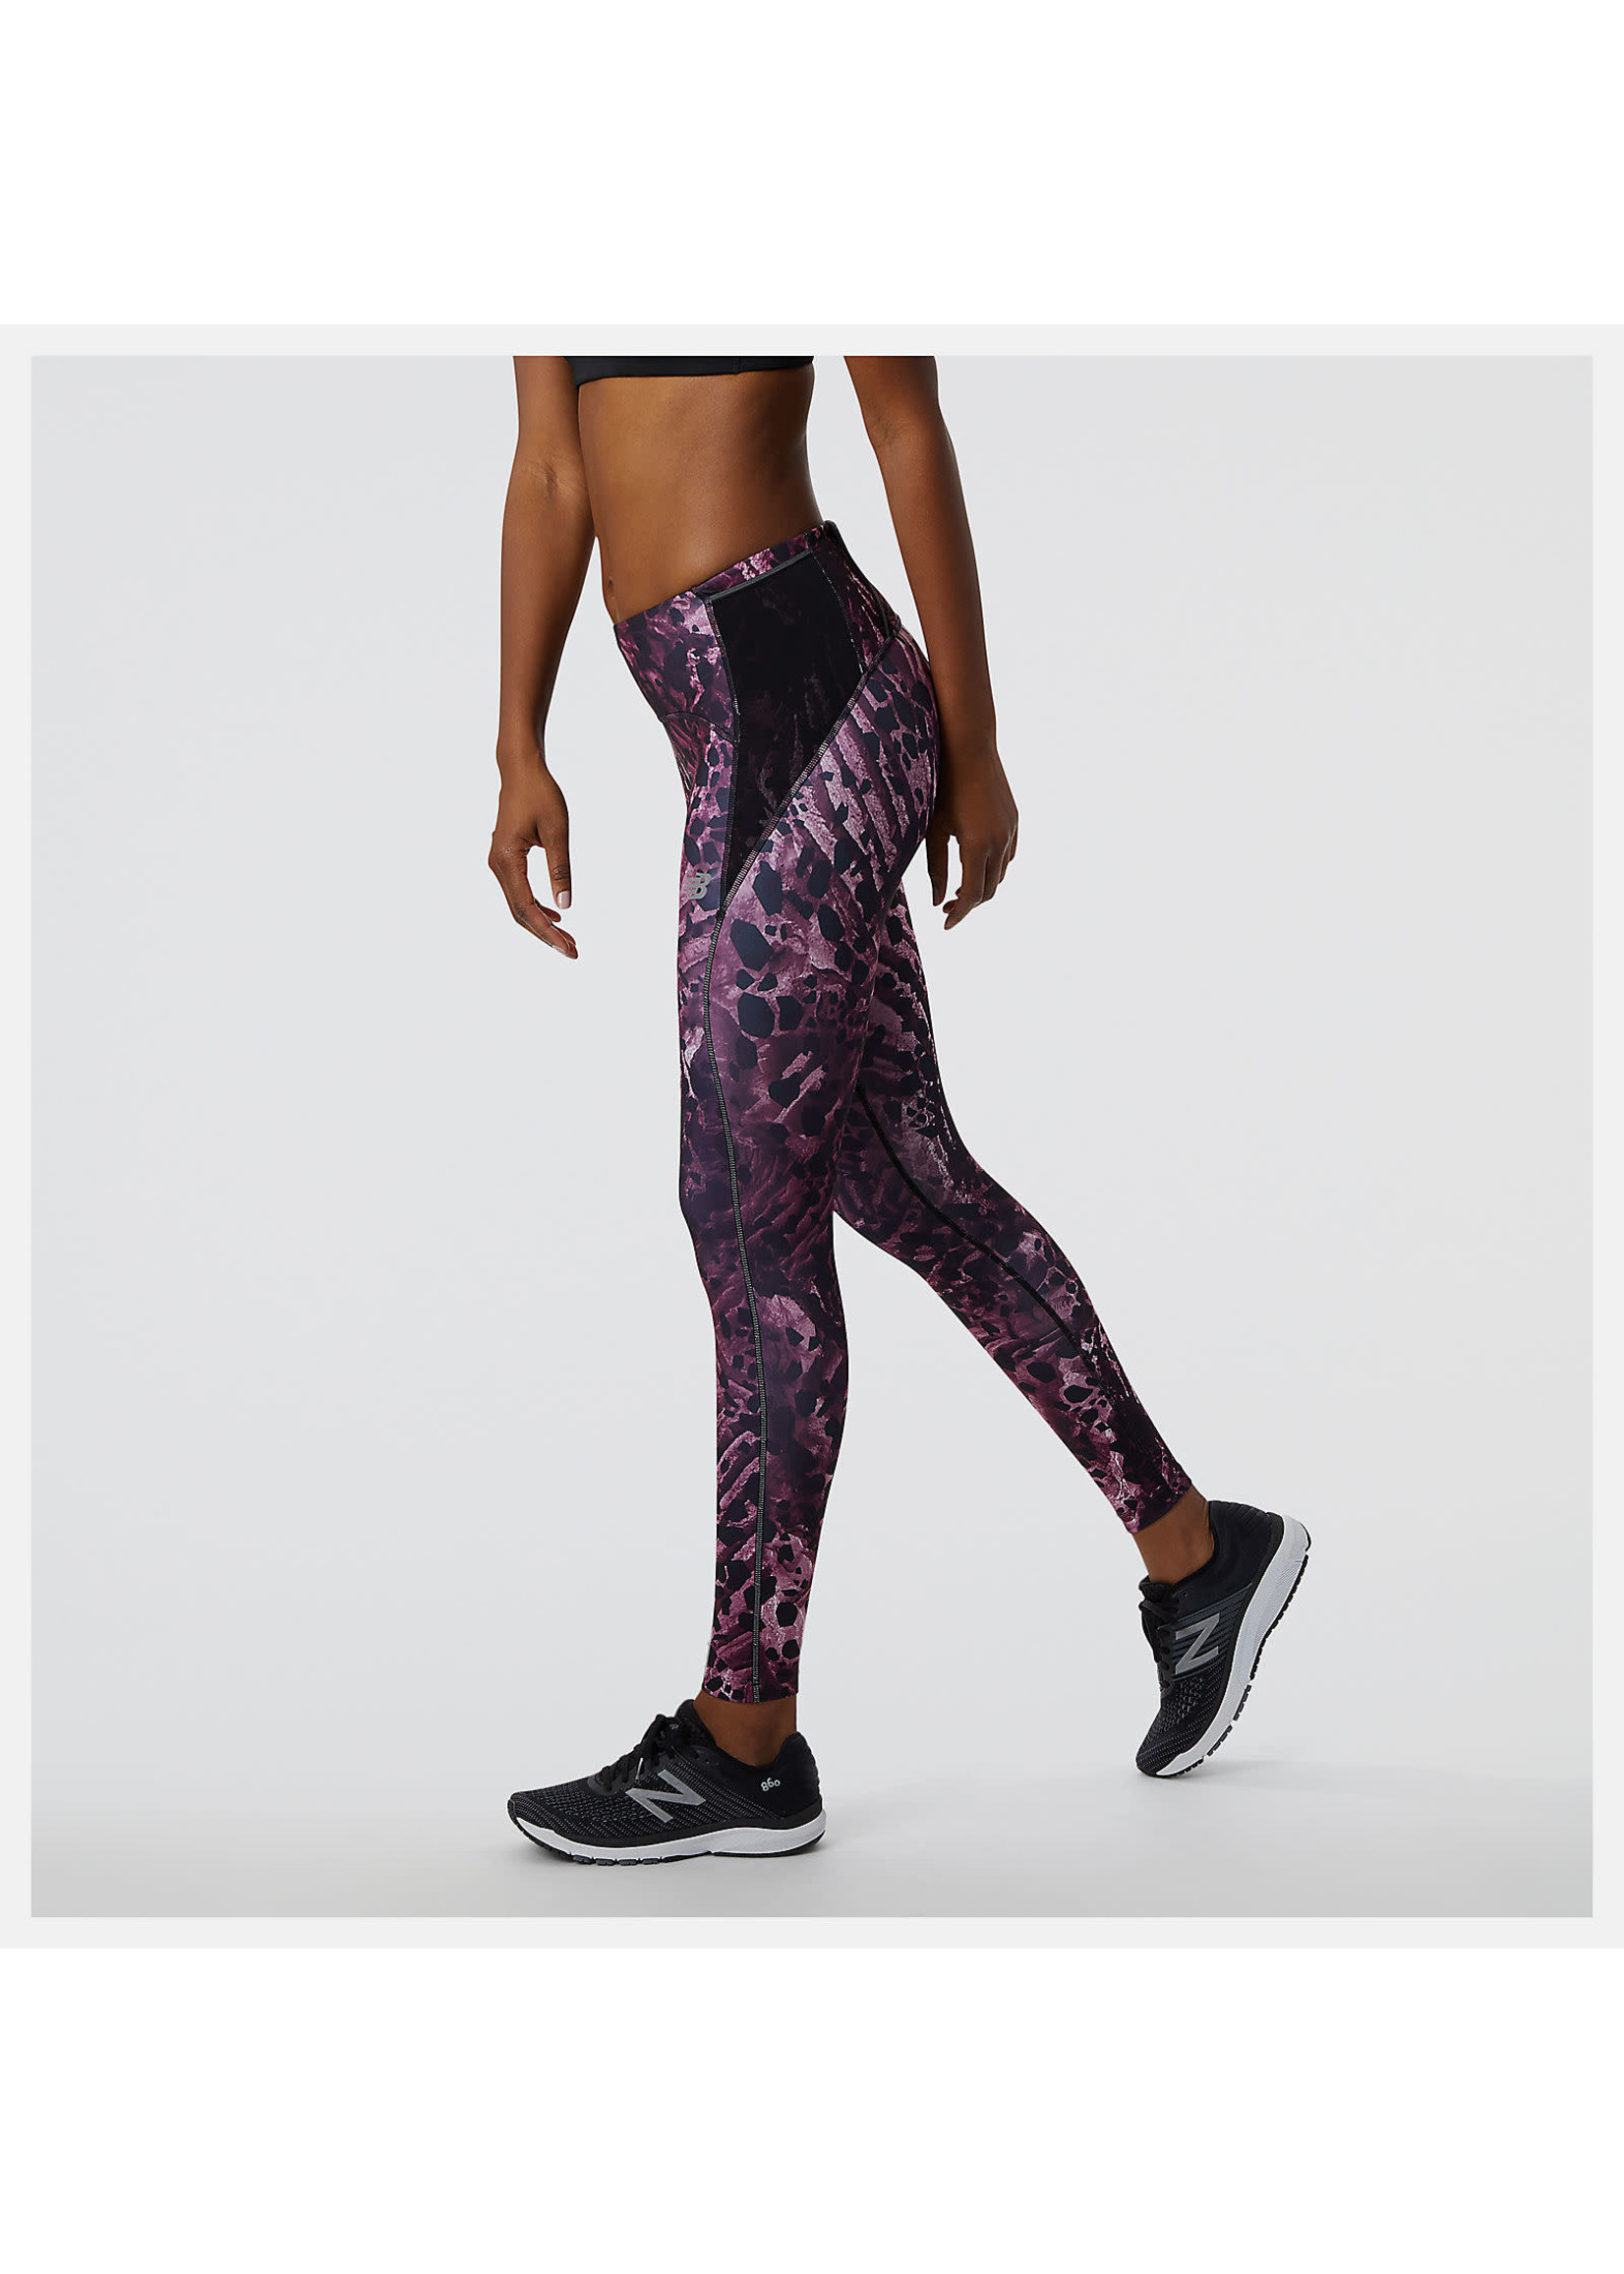 New Balance Reflective Accelerate Tight - Running Tights Women's